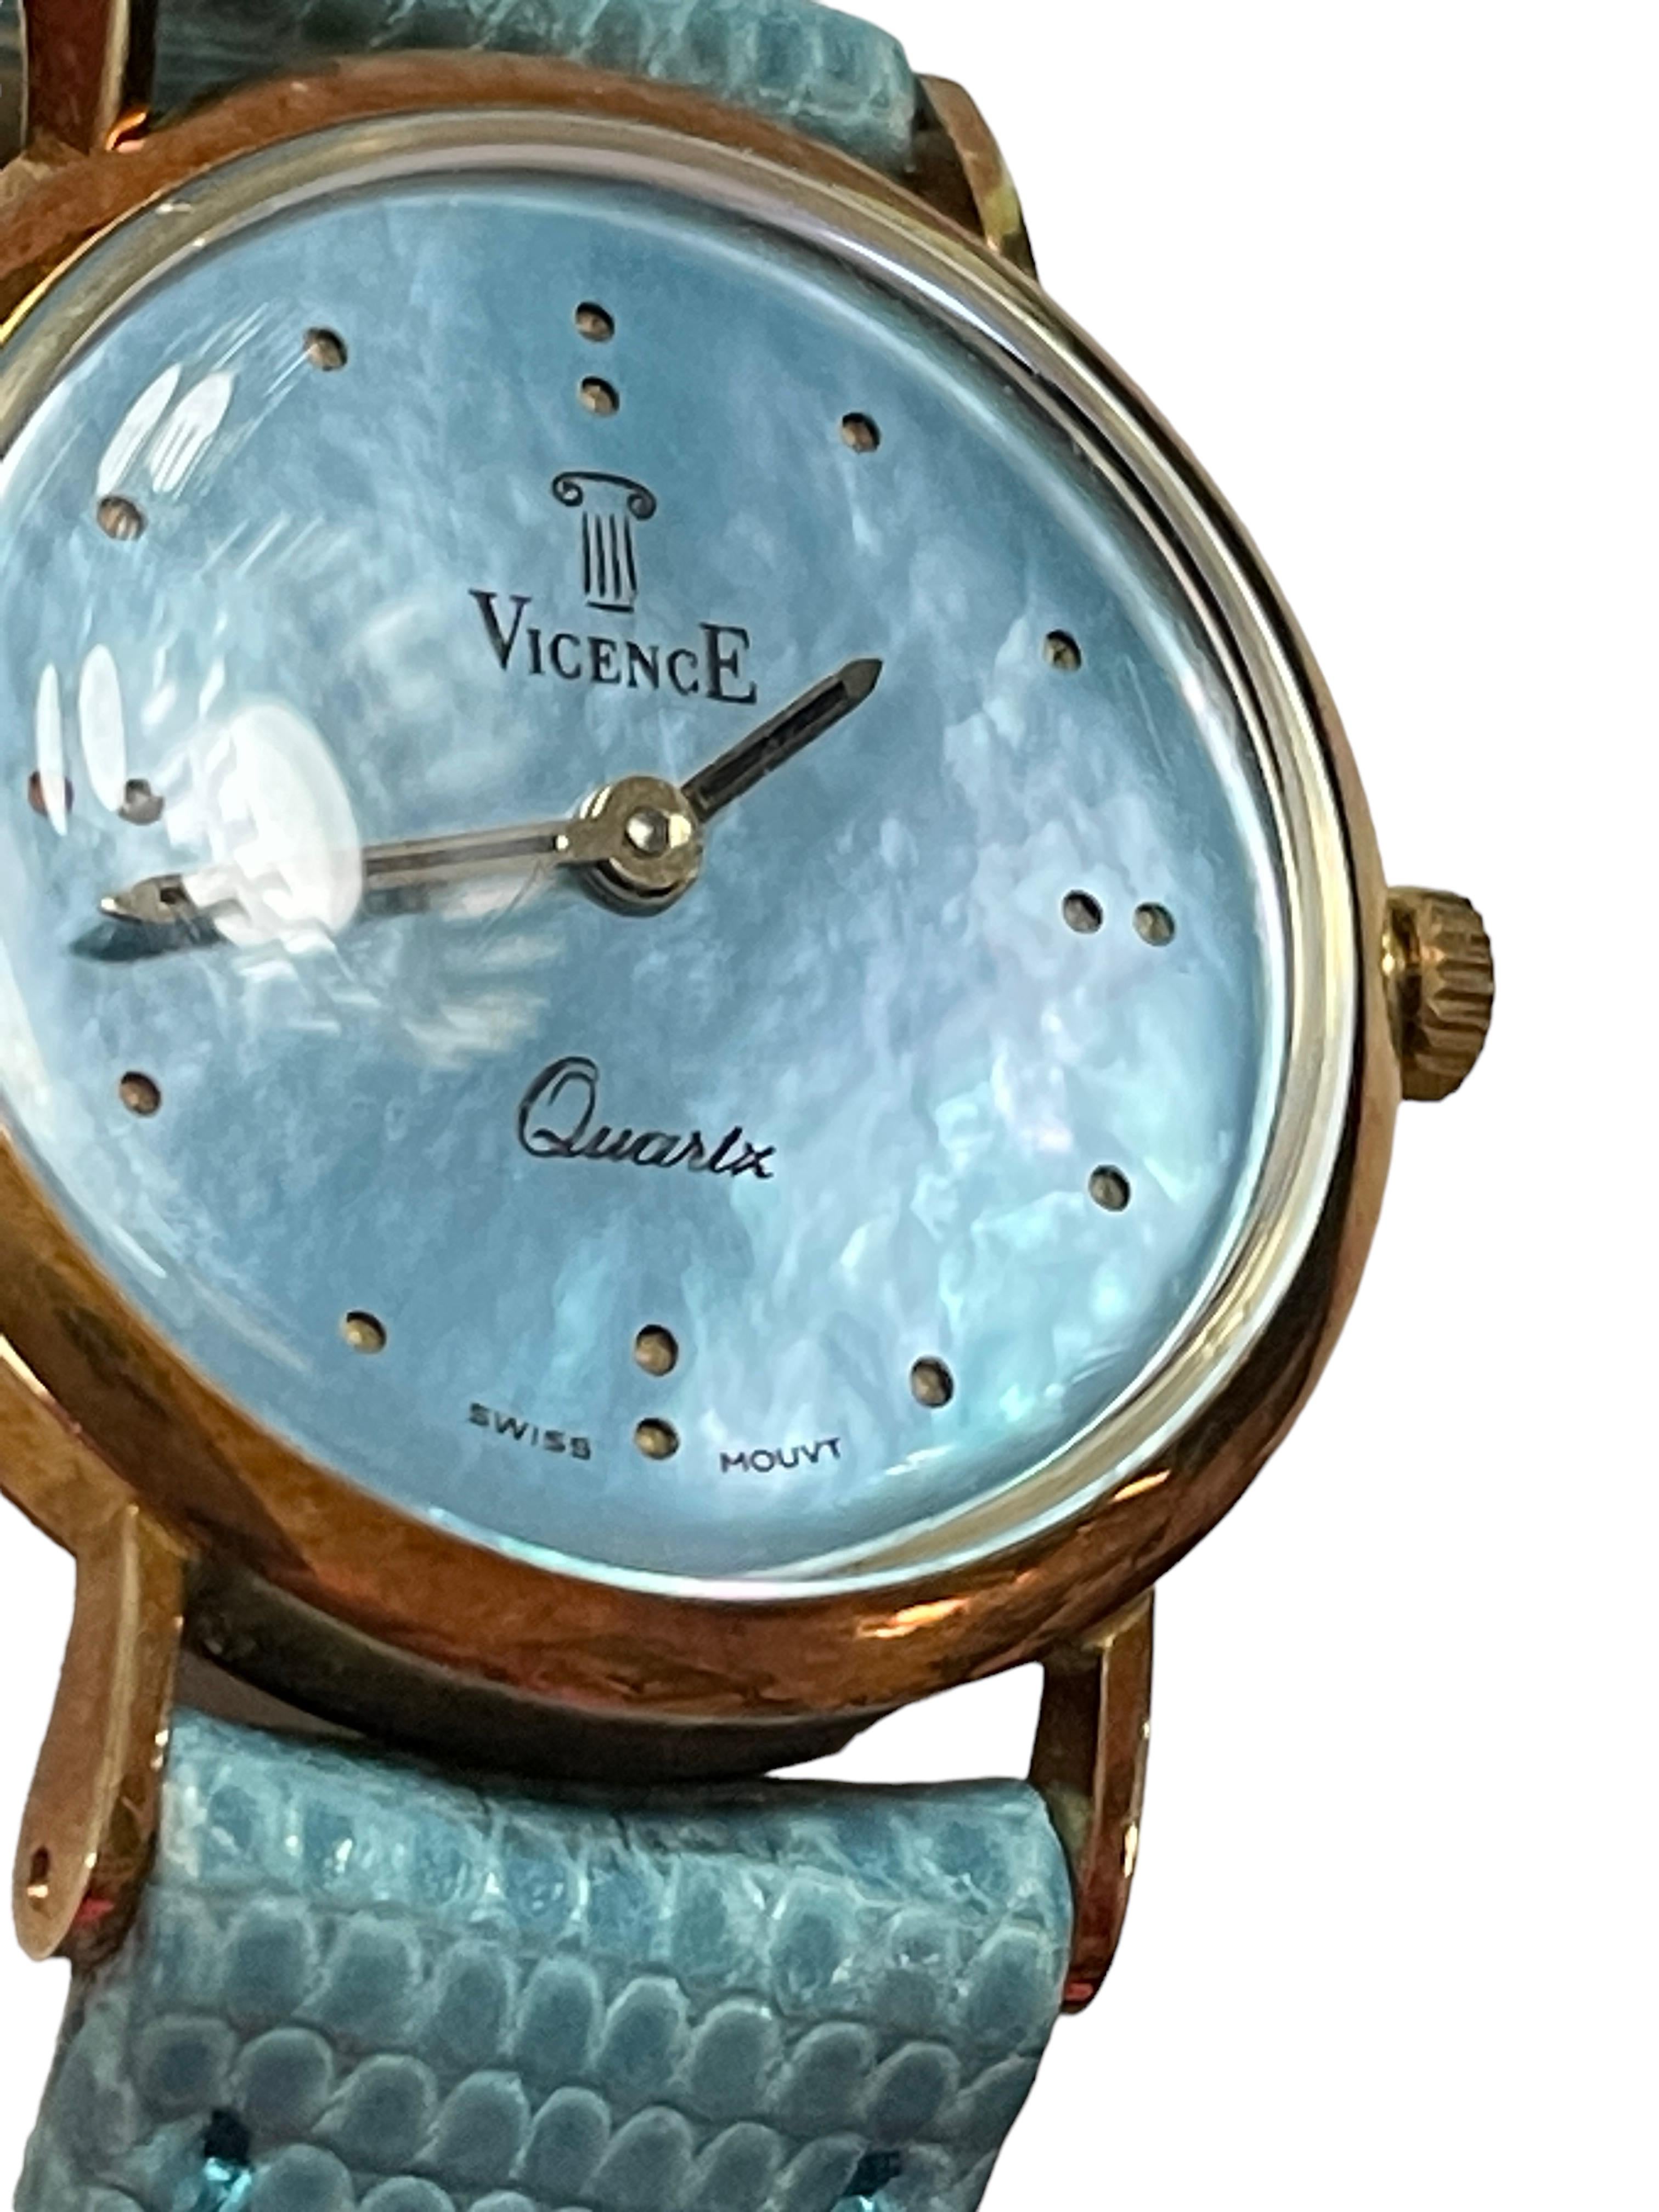 14k Yellow Gold Vicense Blue Pearlized Ladies Quartz Watch with Leather Band For Sale 4